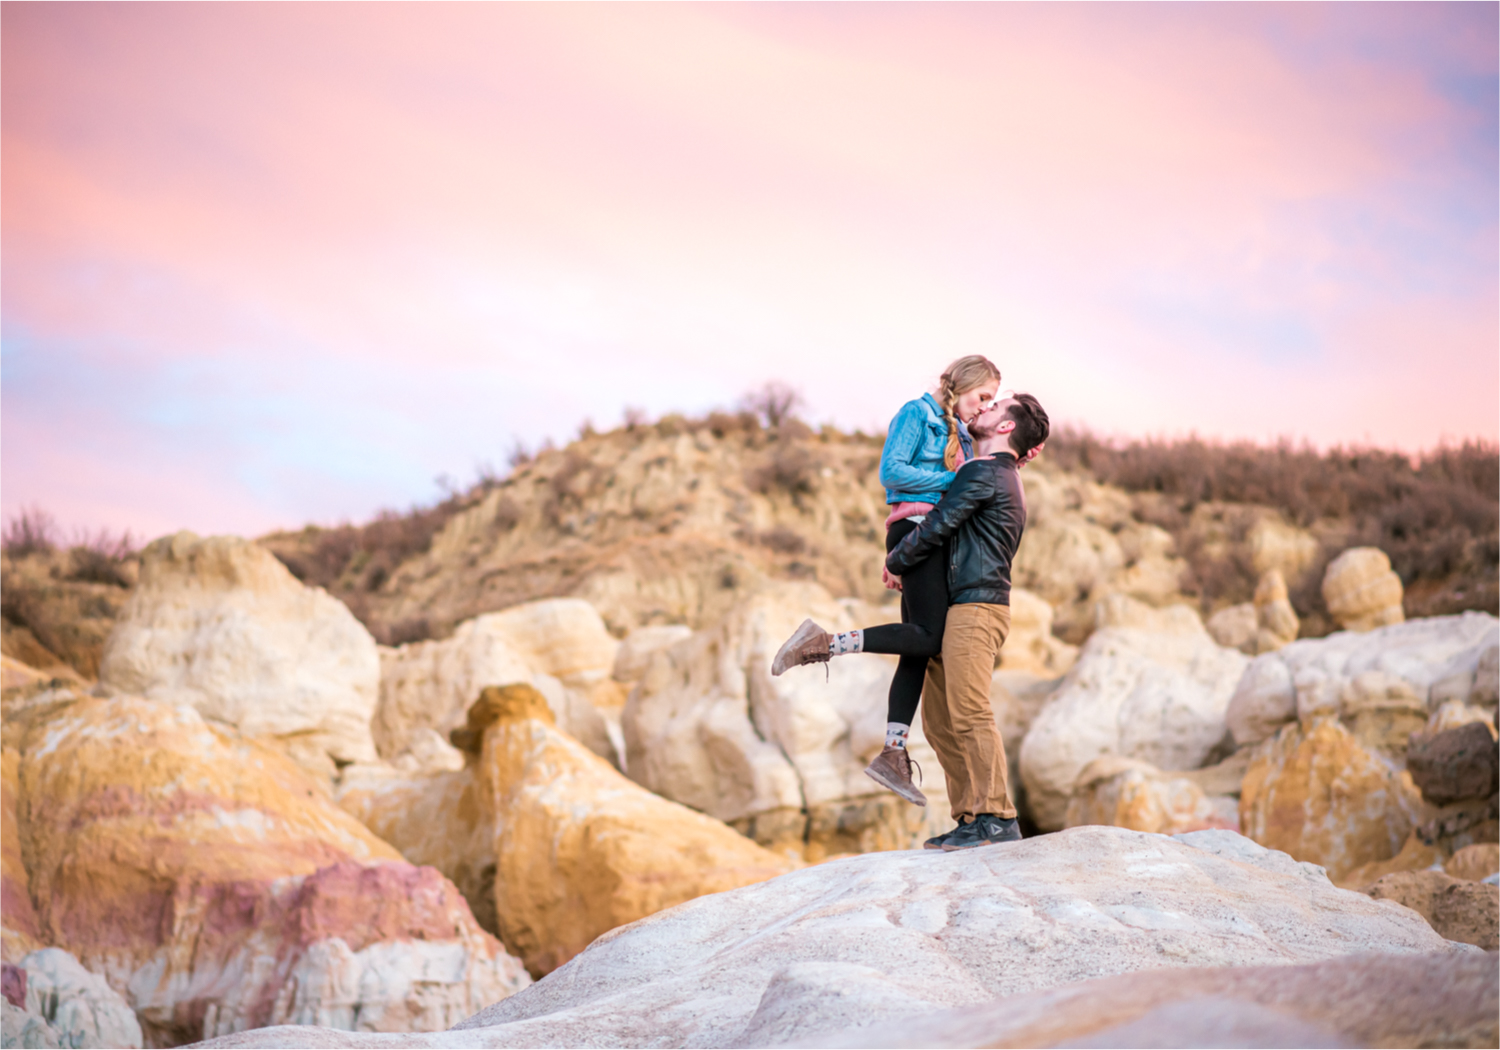 Engagement at Colorado Paint Mines in Calhan, Colorado near Colorado Springs | Britni Girard Photography Colorado Wedding Photographer, adventure engagement session with whimsical charm for two newly engaged artists | Sunset Engagement at Paint Mines